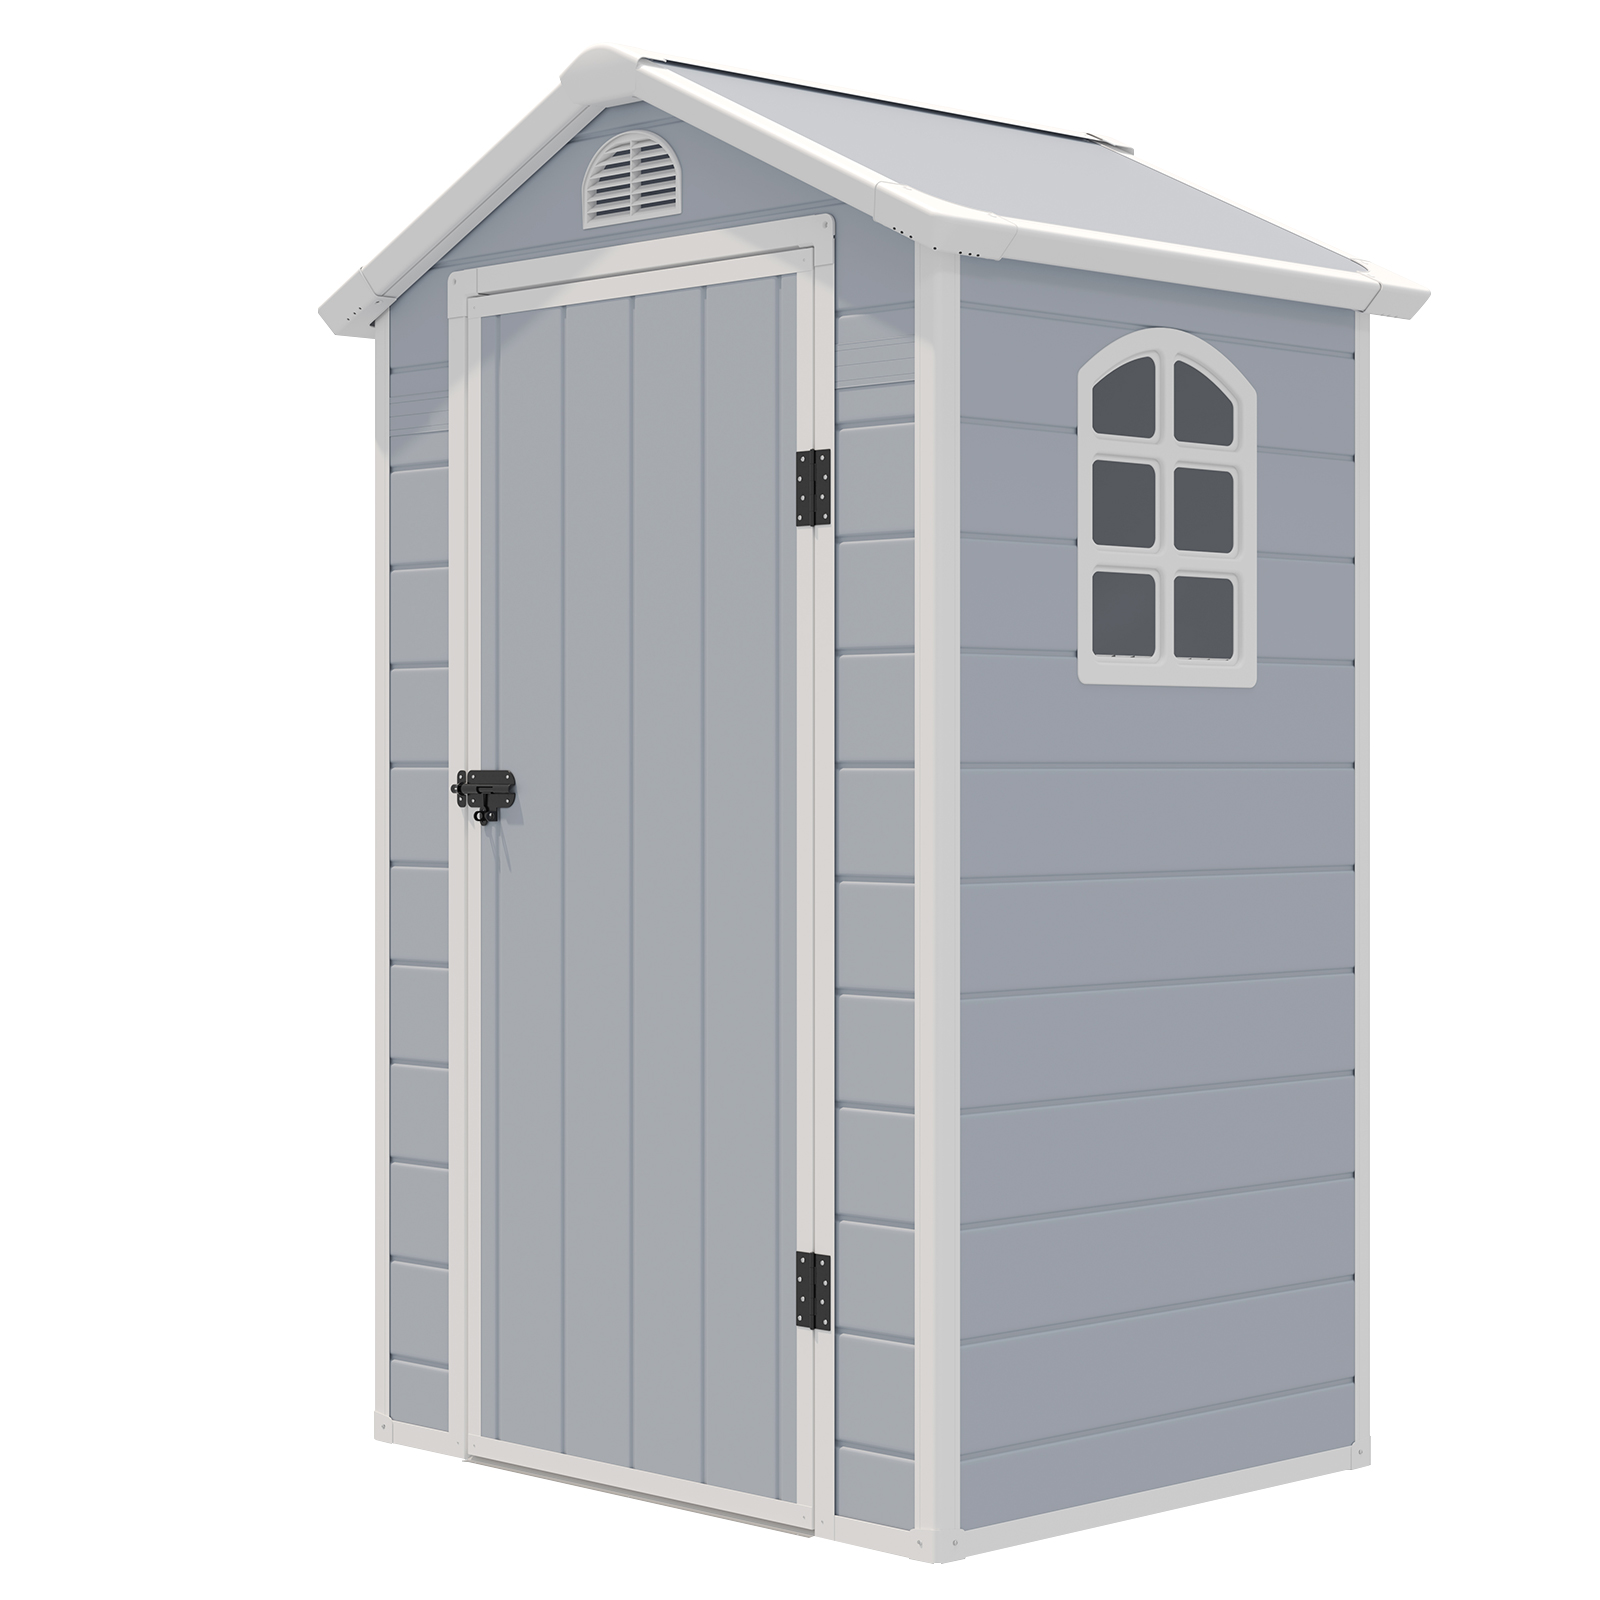 Outdoor Storage Shed with Lockable Door Window and Air Vents-Grey